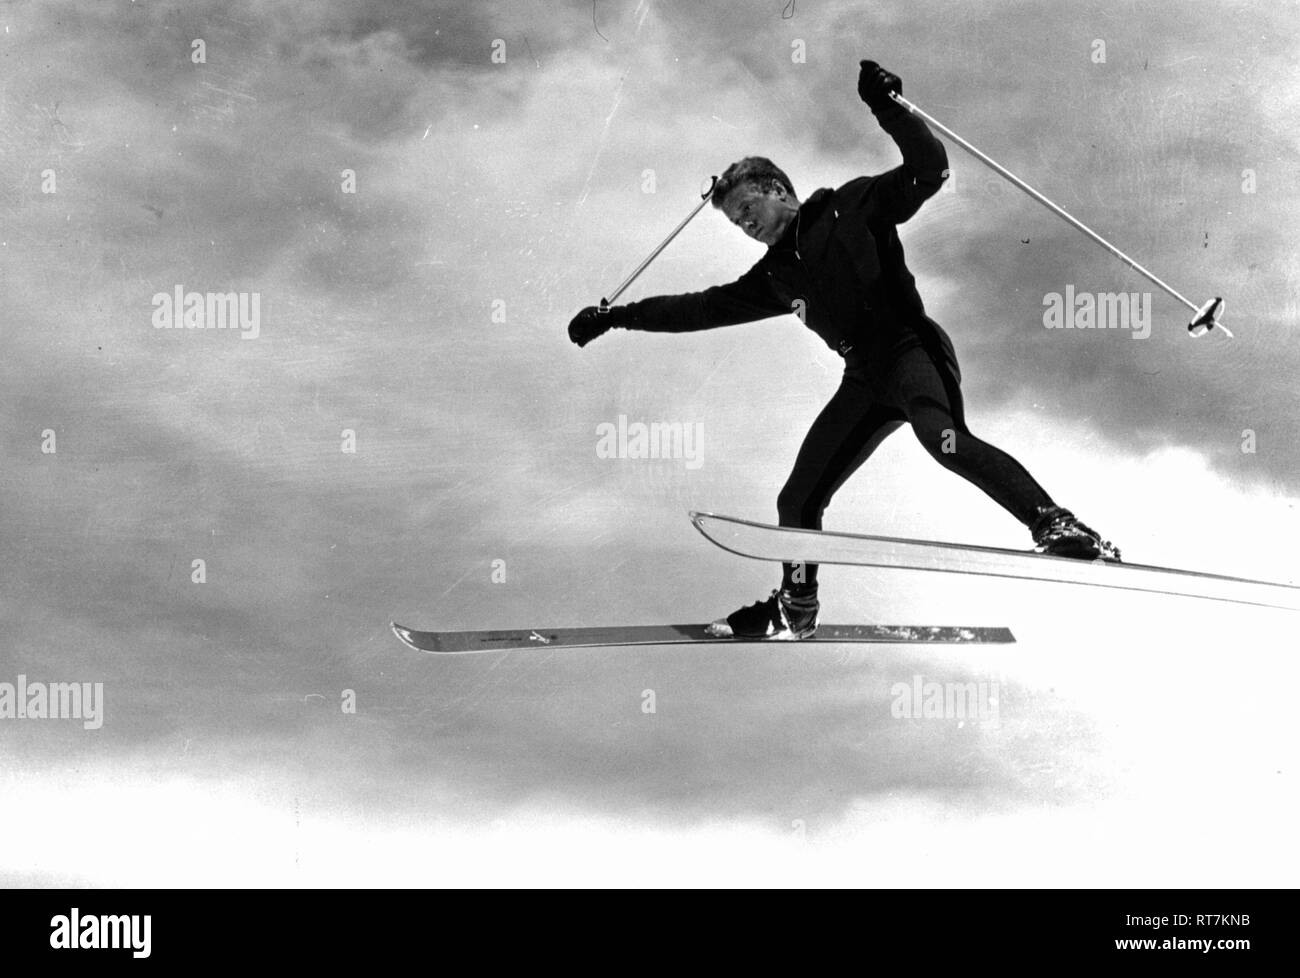 Prinzing, Gerhard, * 22.4.1943, German ski racer, during a race, 1960s, Additional-Rights-Clearance-Info-Not-Available Stock Photo